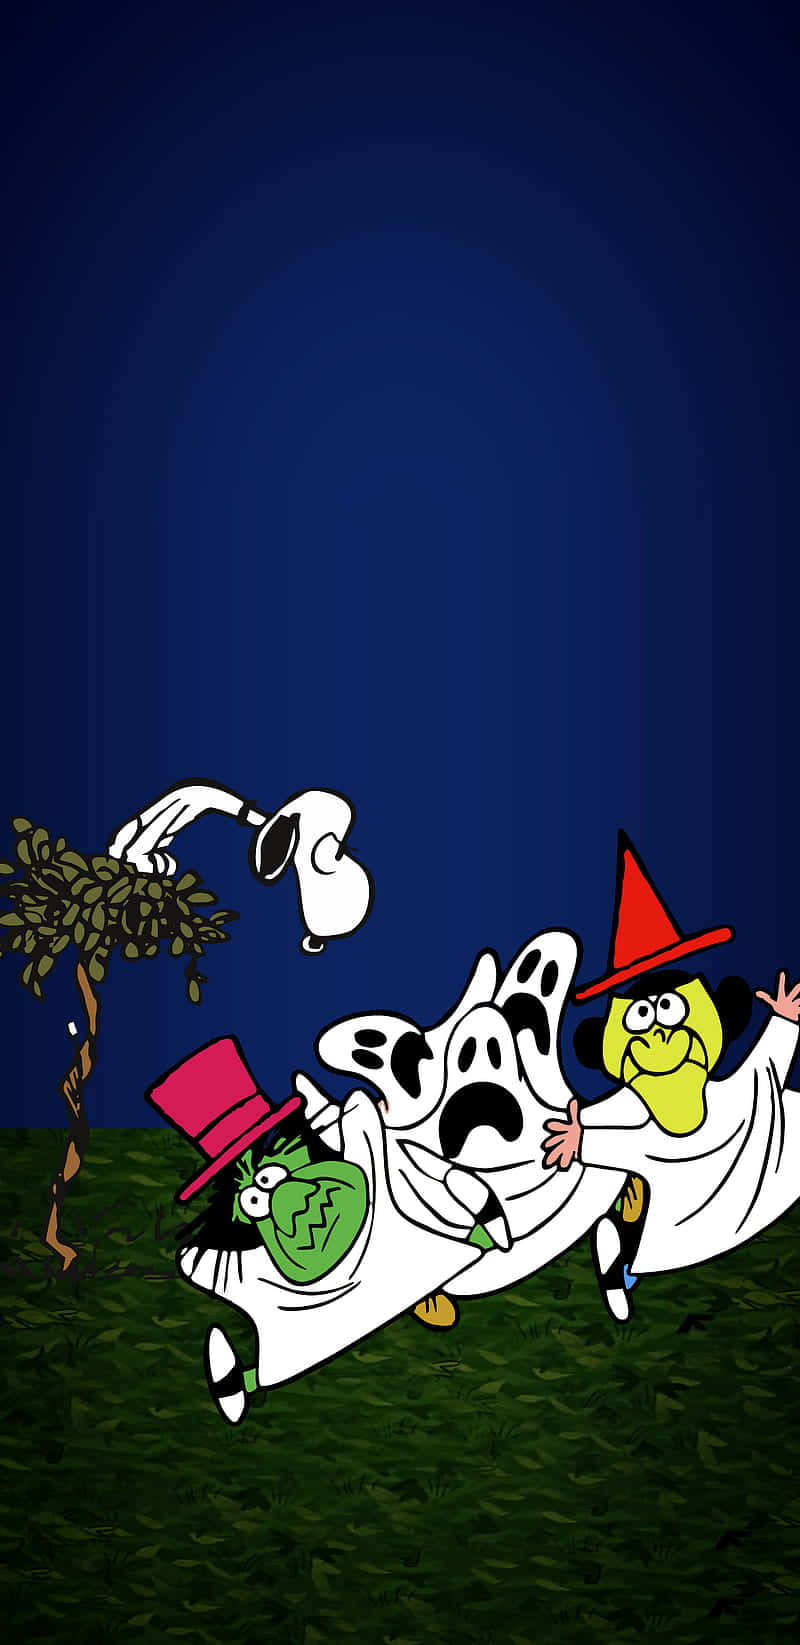 Charlie Brown and the Peanuts gang getting in the Halloween spirit! Wallpaper